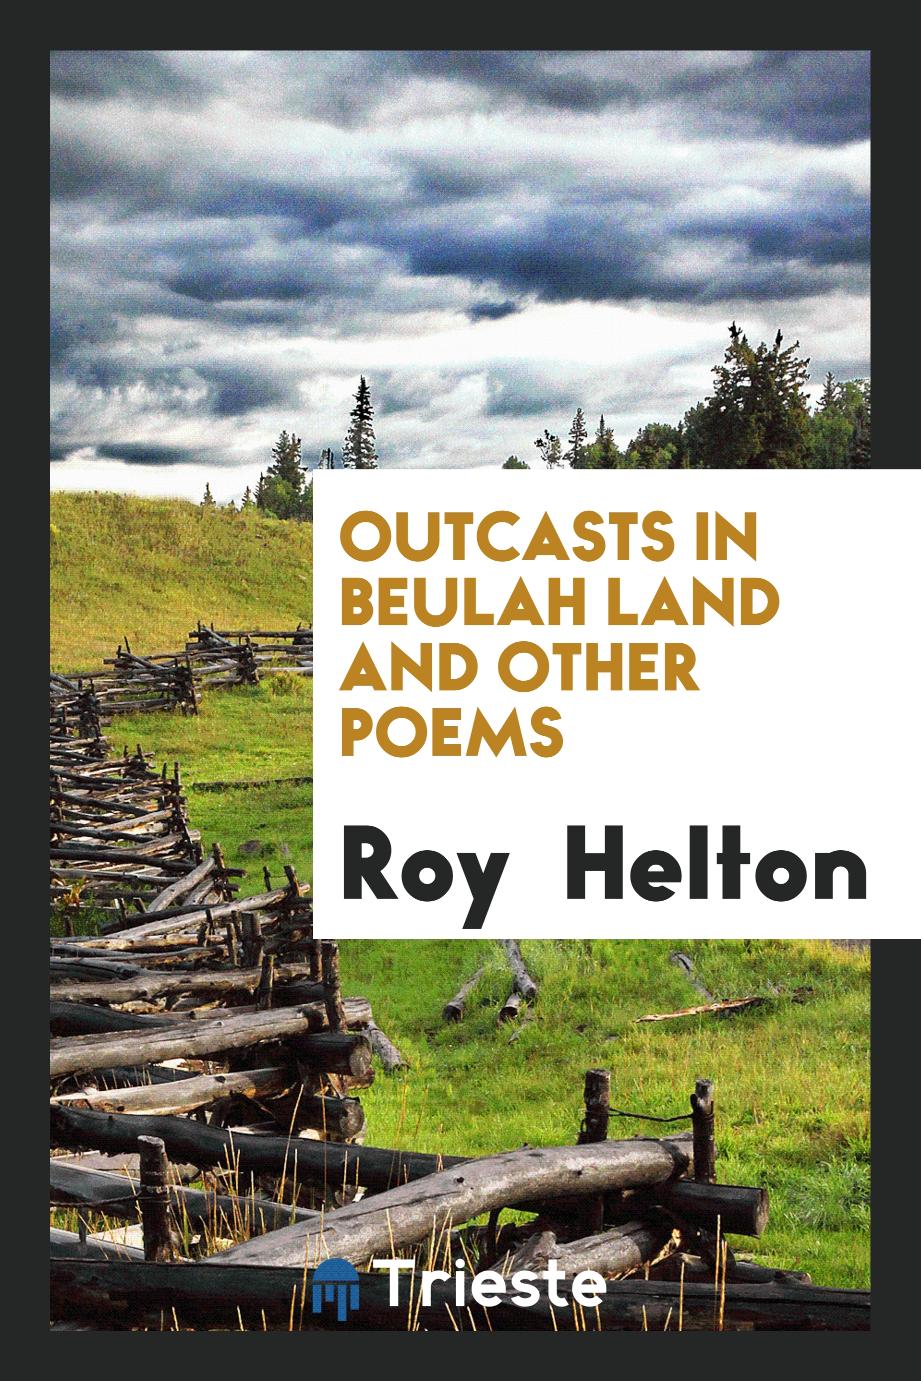 Outcasts in Beulah Land and other poems